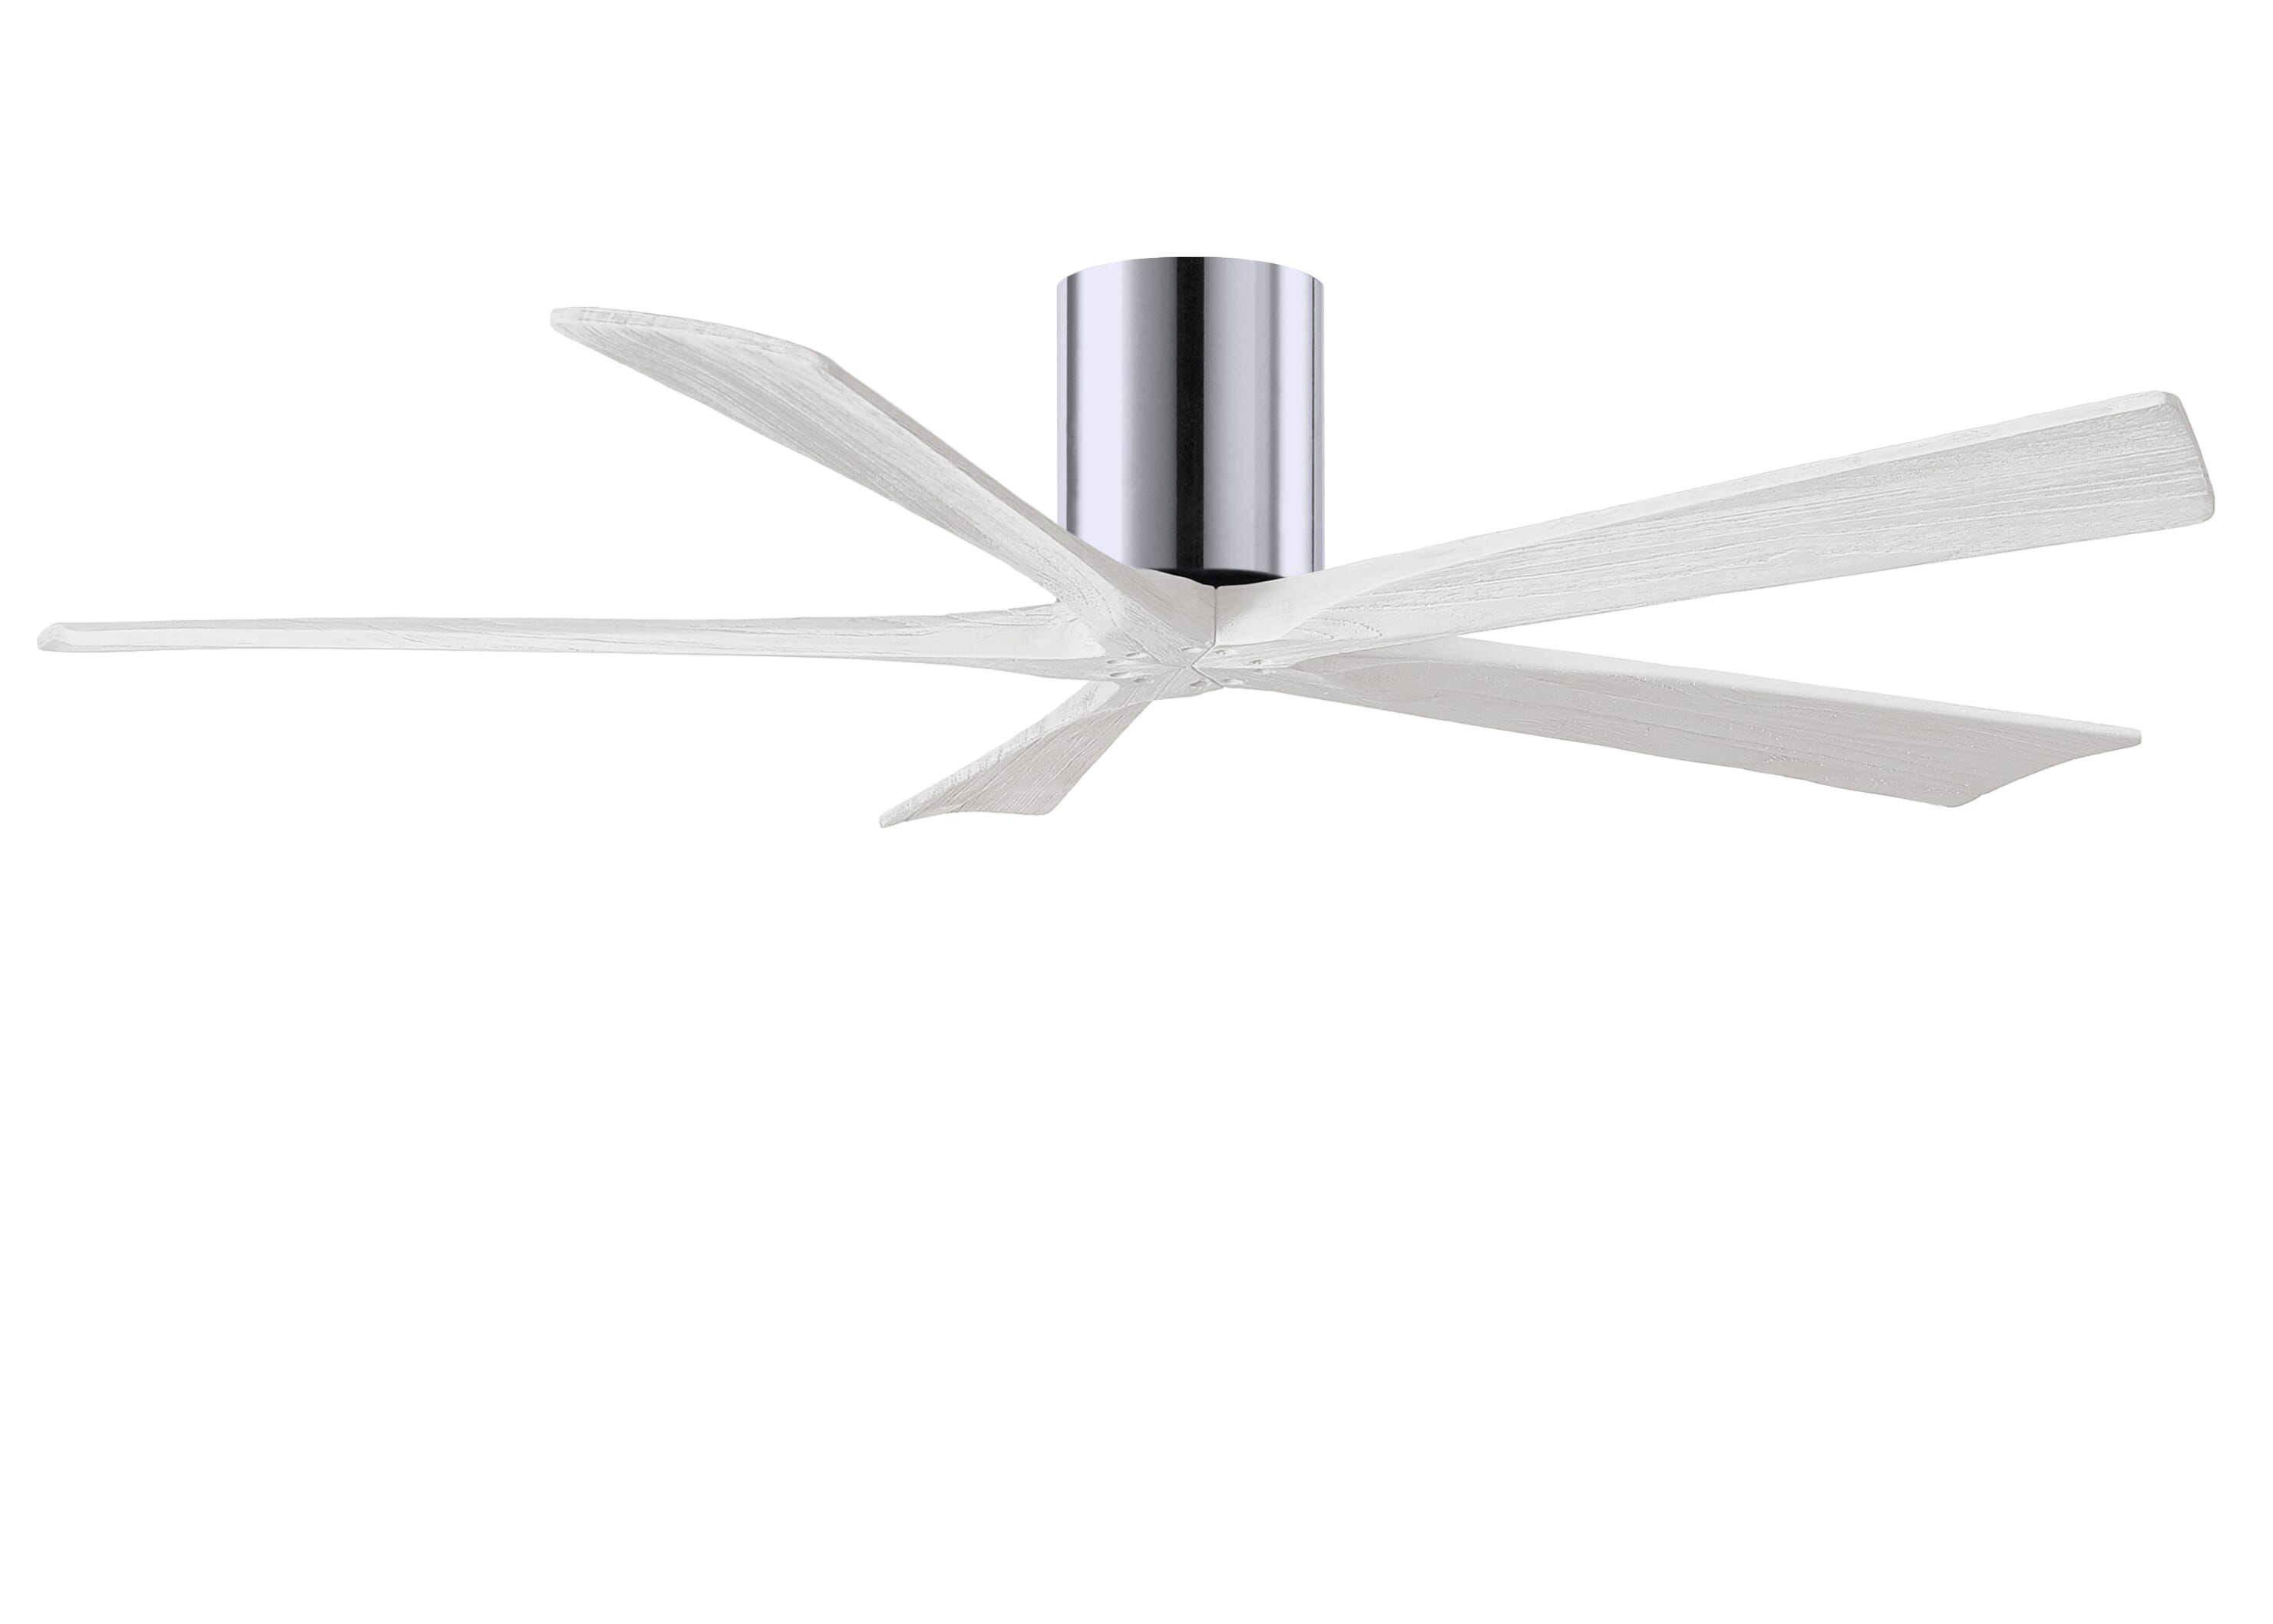 Irene 6-Speed DC 60"" Ceiling Fan in Polished Chrome with Matte White blades -  Matthews Fan Company, IR5H-CR-MWH-60